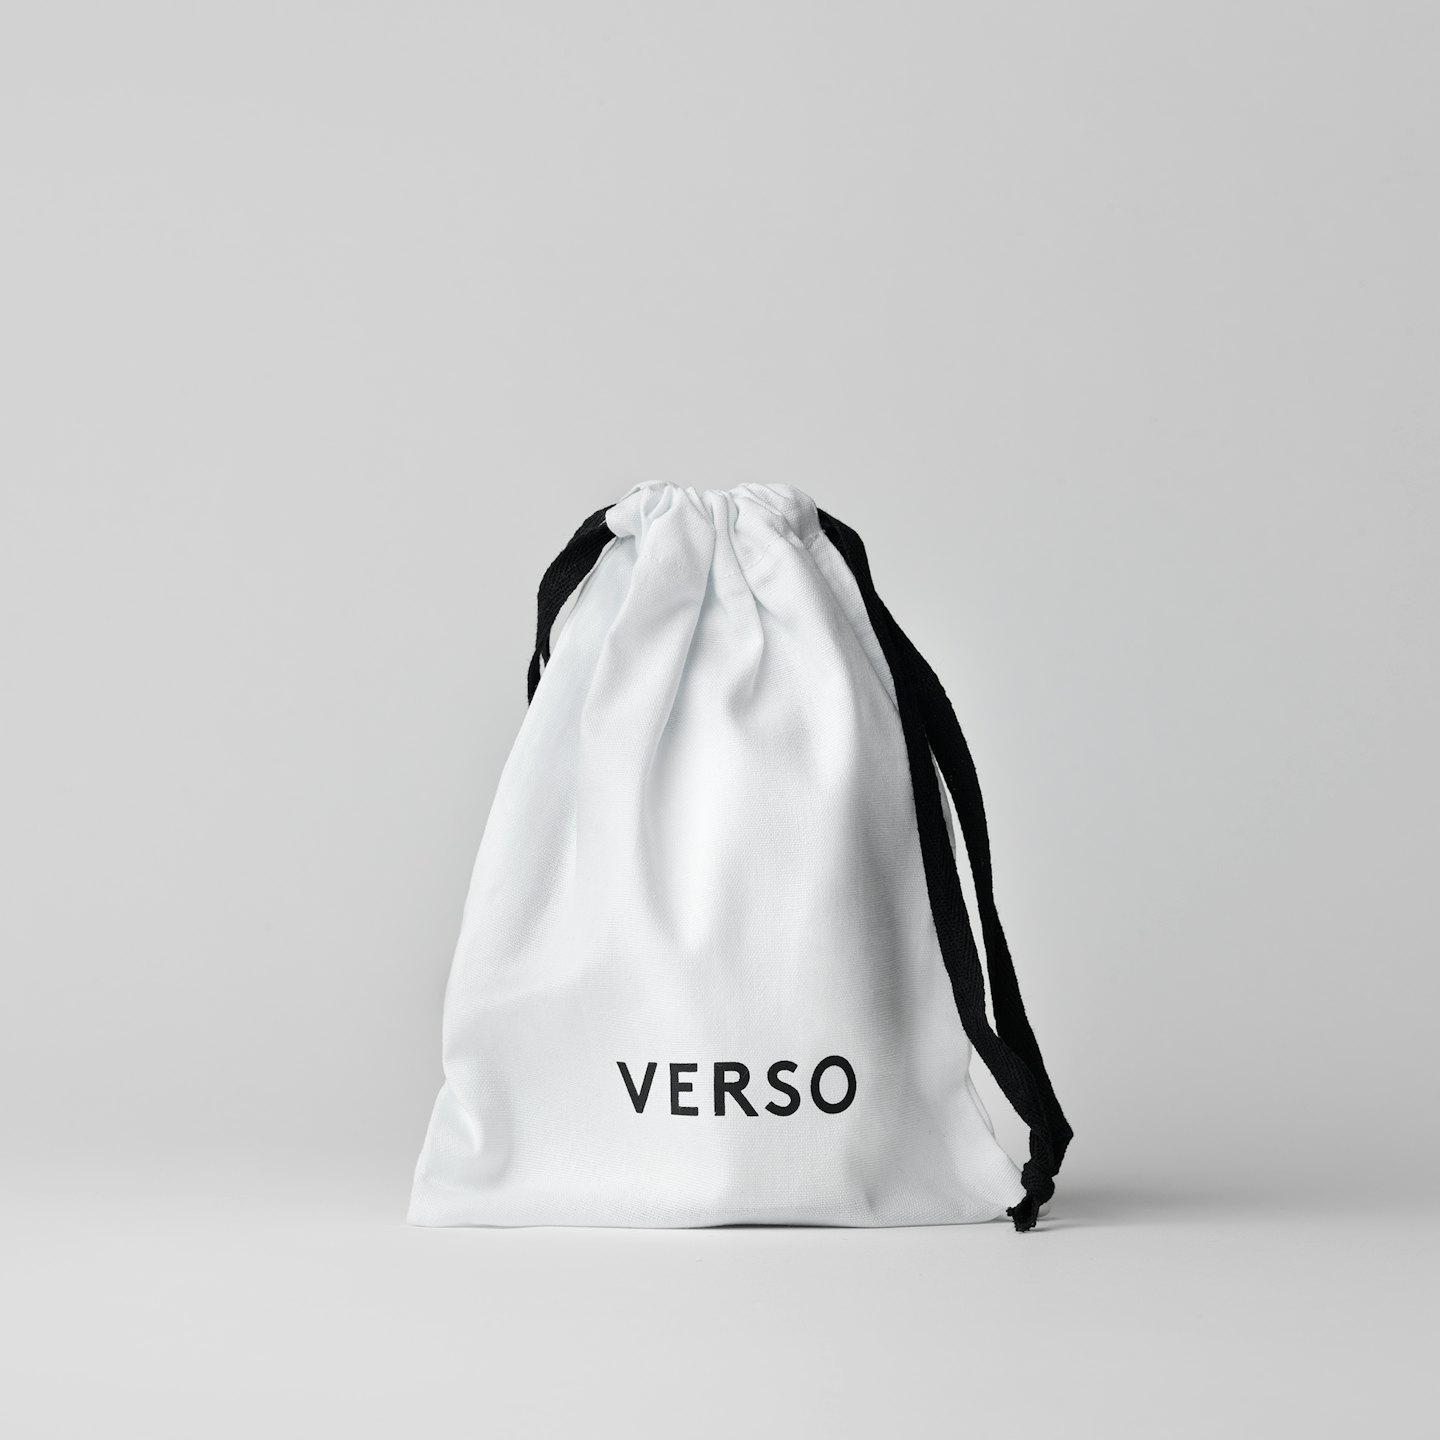 Verso Hydration Discovery Kit